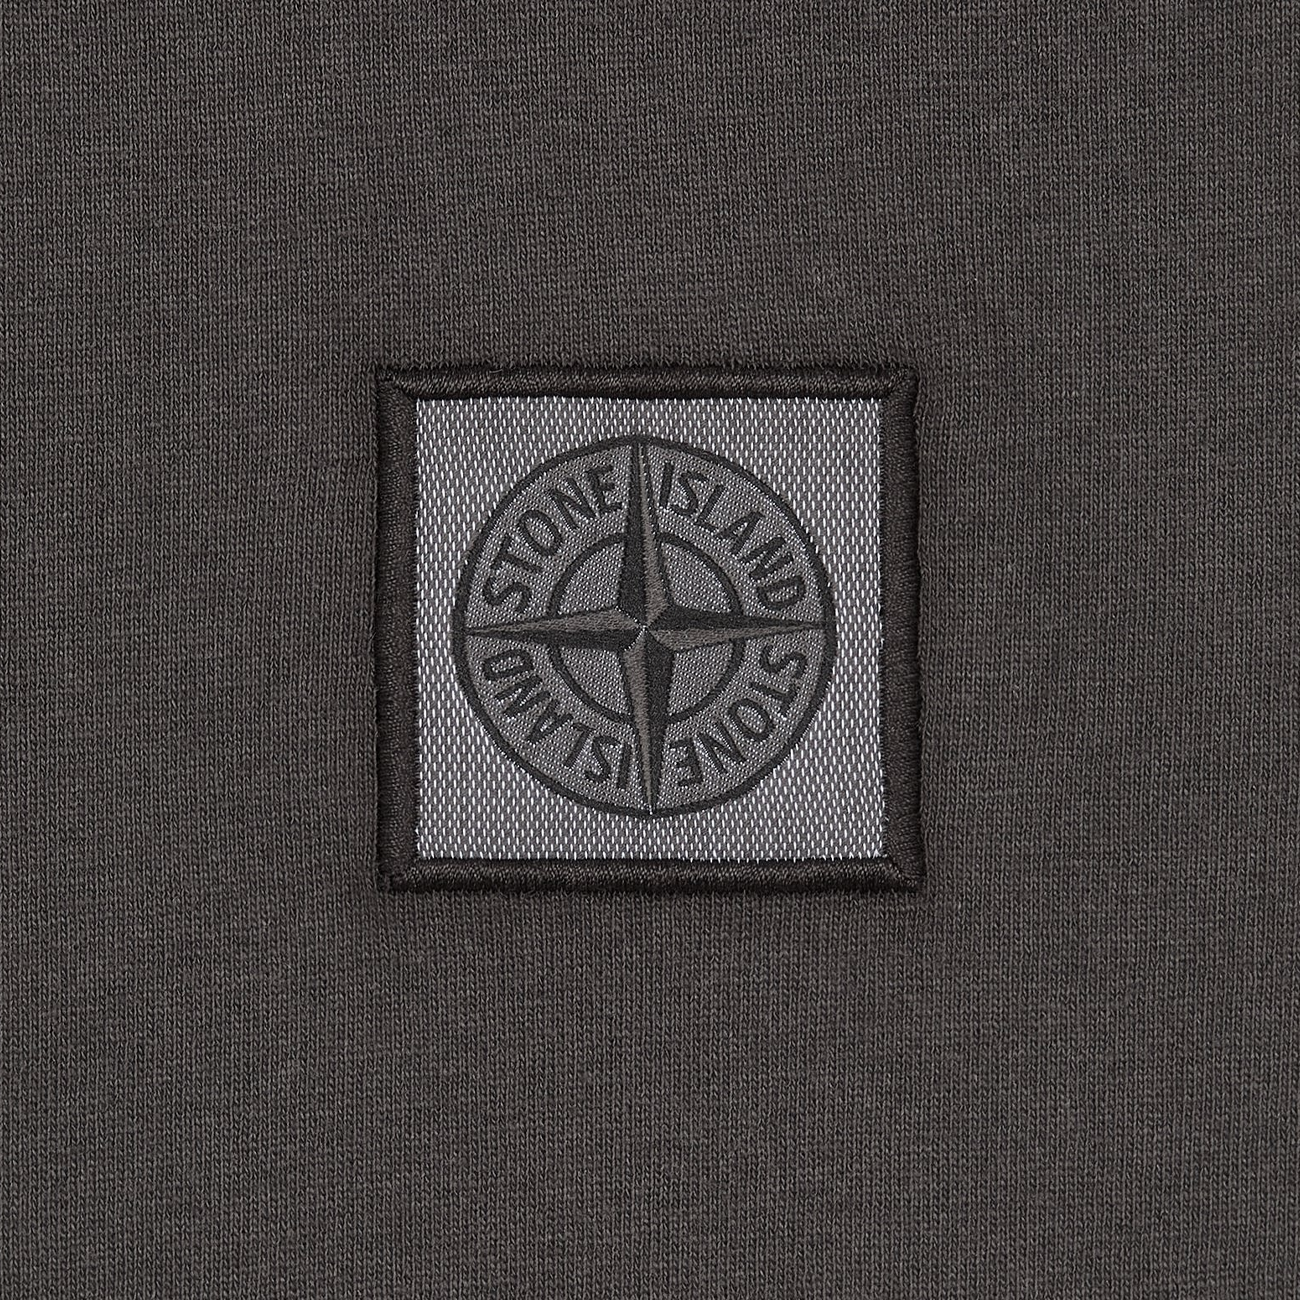 T-Shirt SS Compass Patch - Charcoal 6580